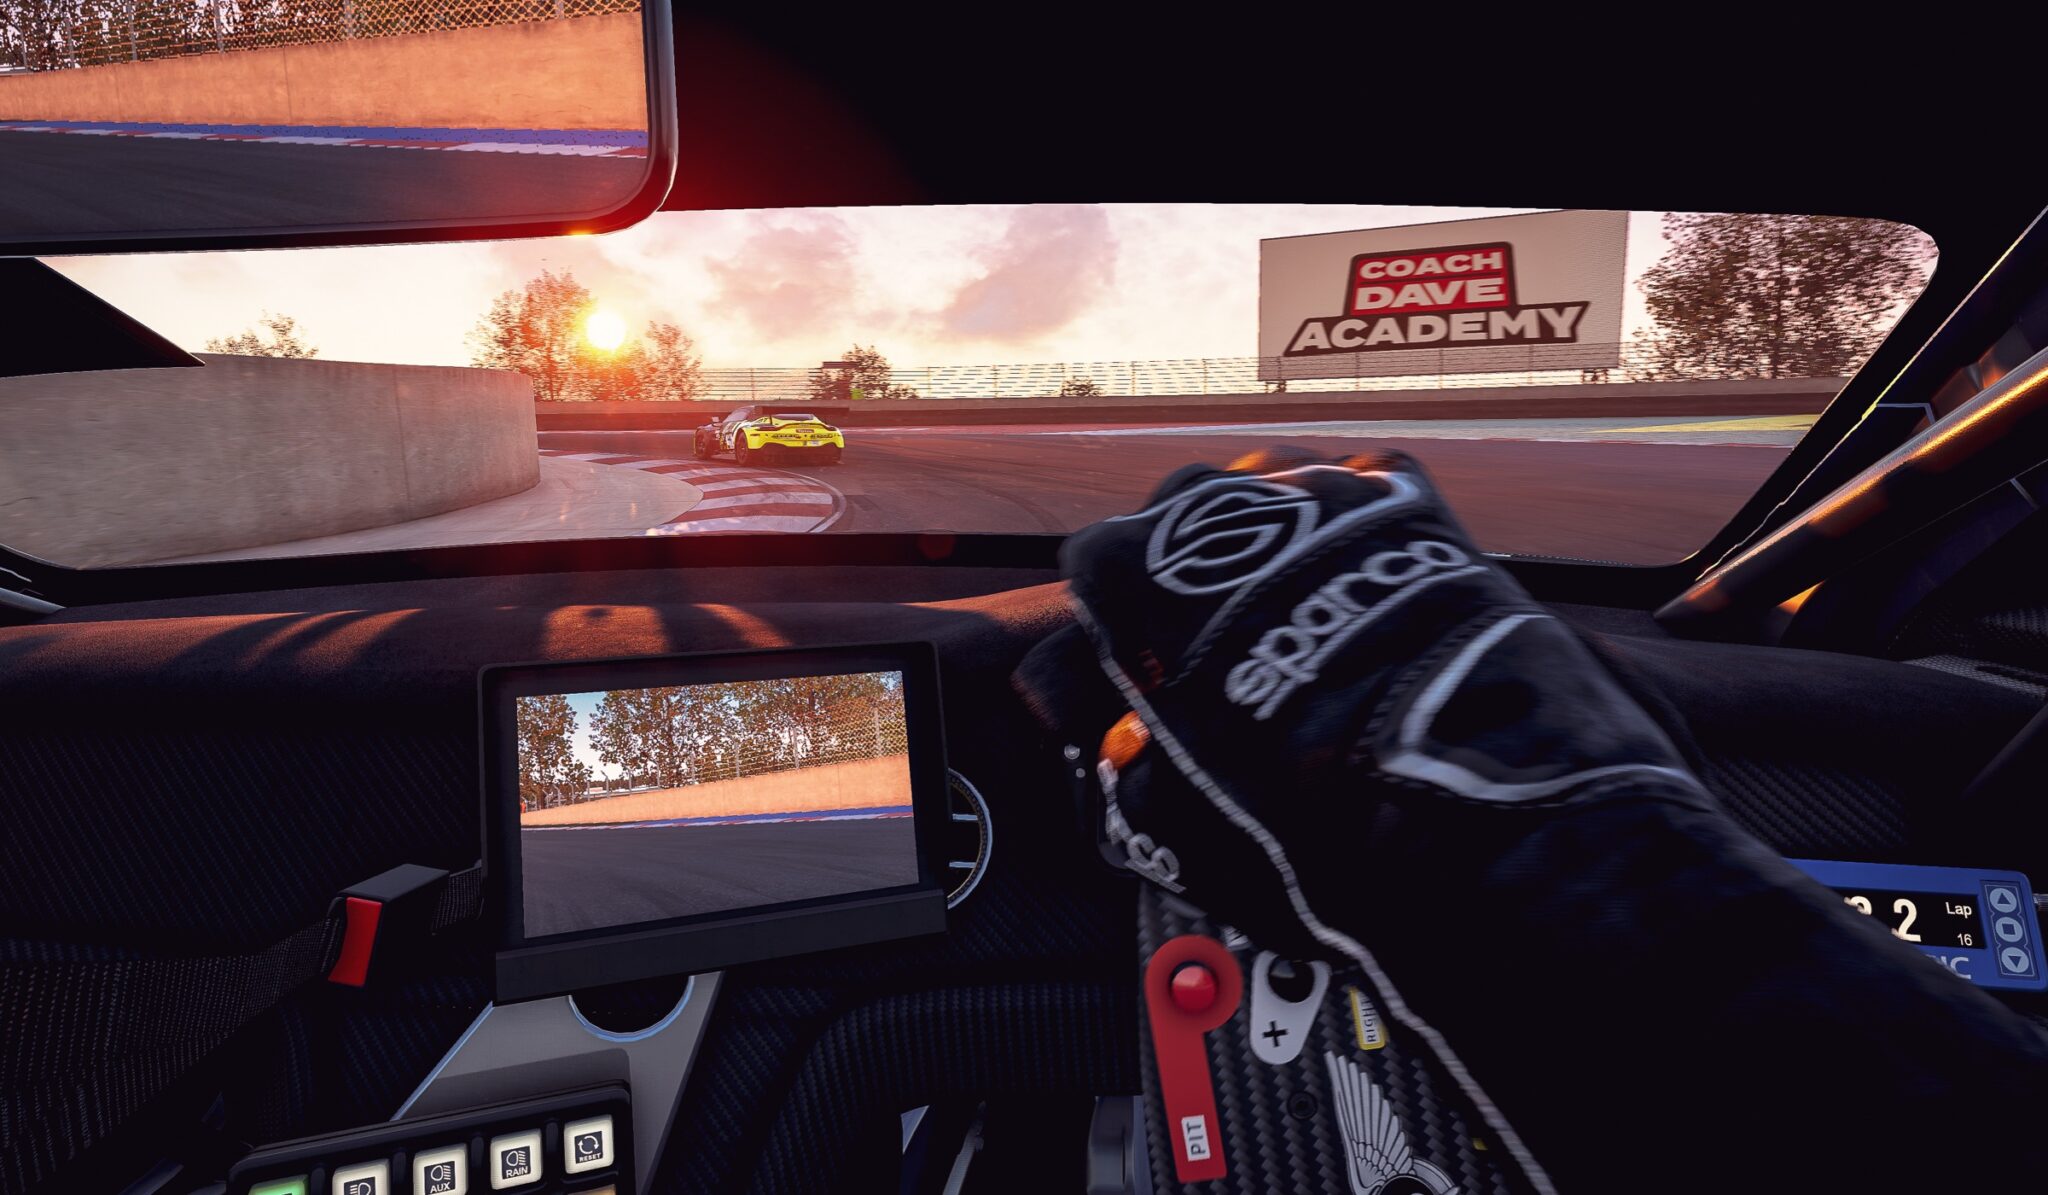 Connect on Social Media for Simracing Updates